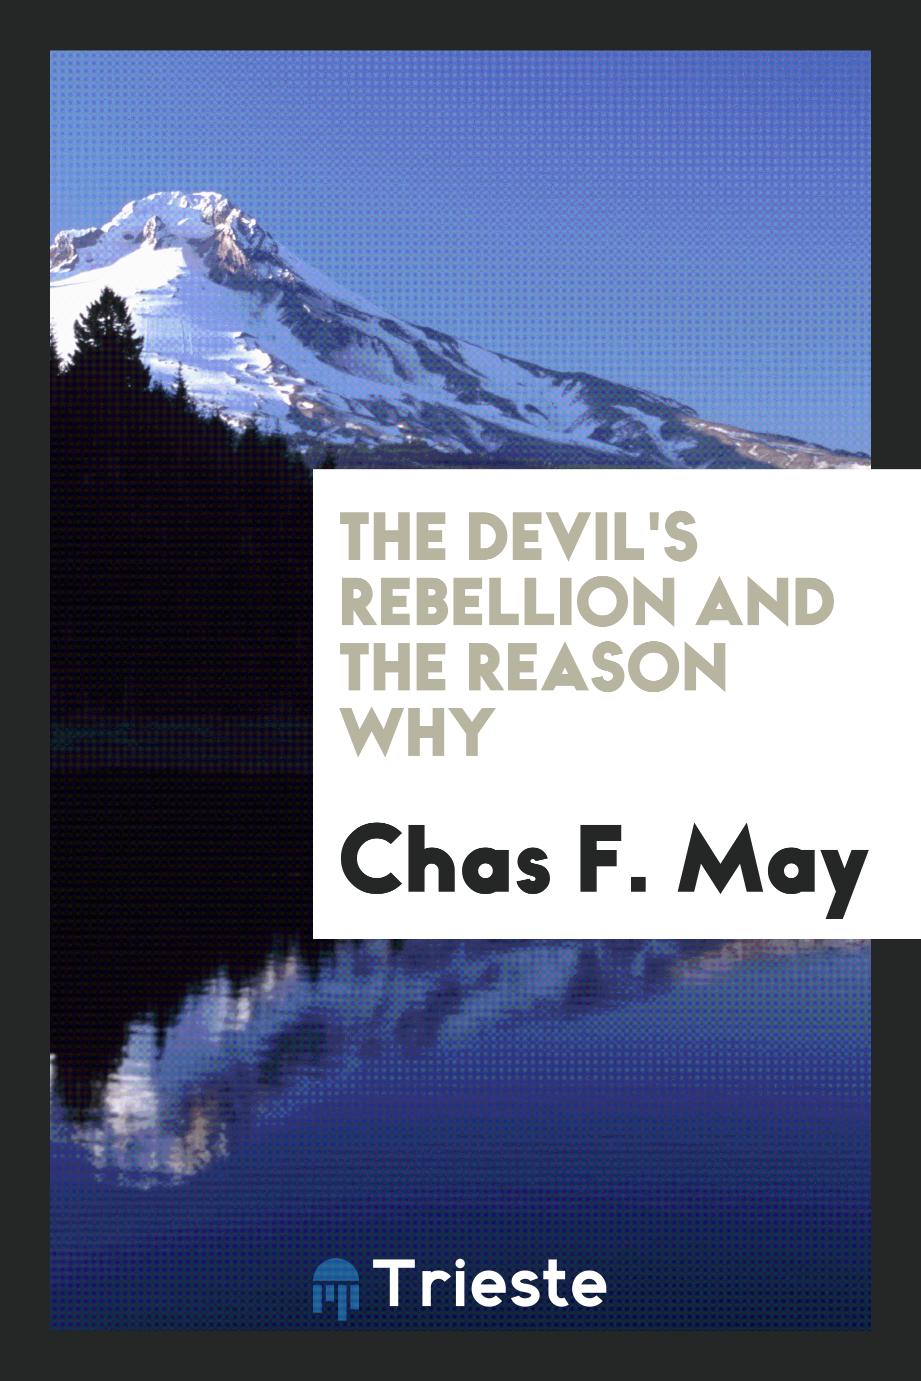 Chas. F. May - The Devil's Rebellion and the Reason Why